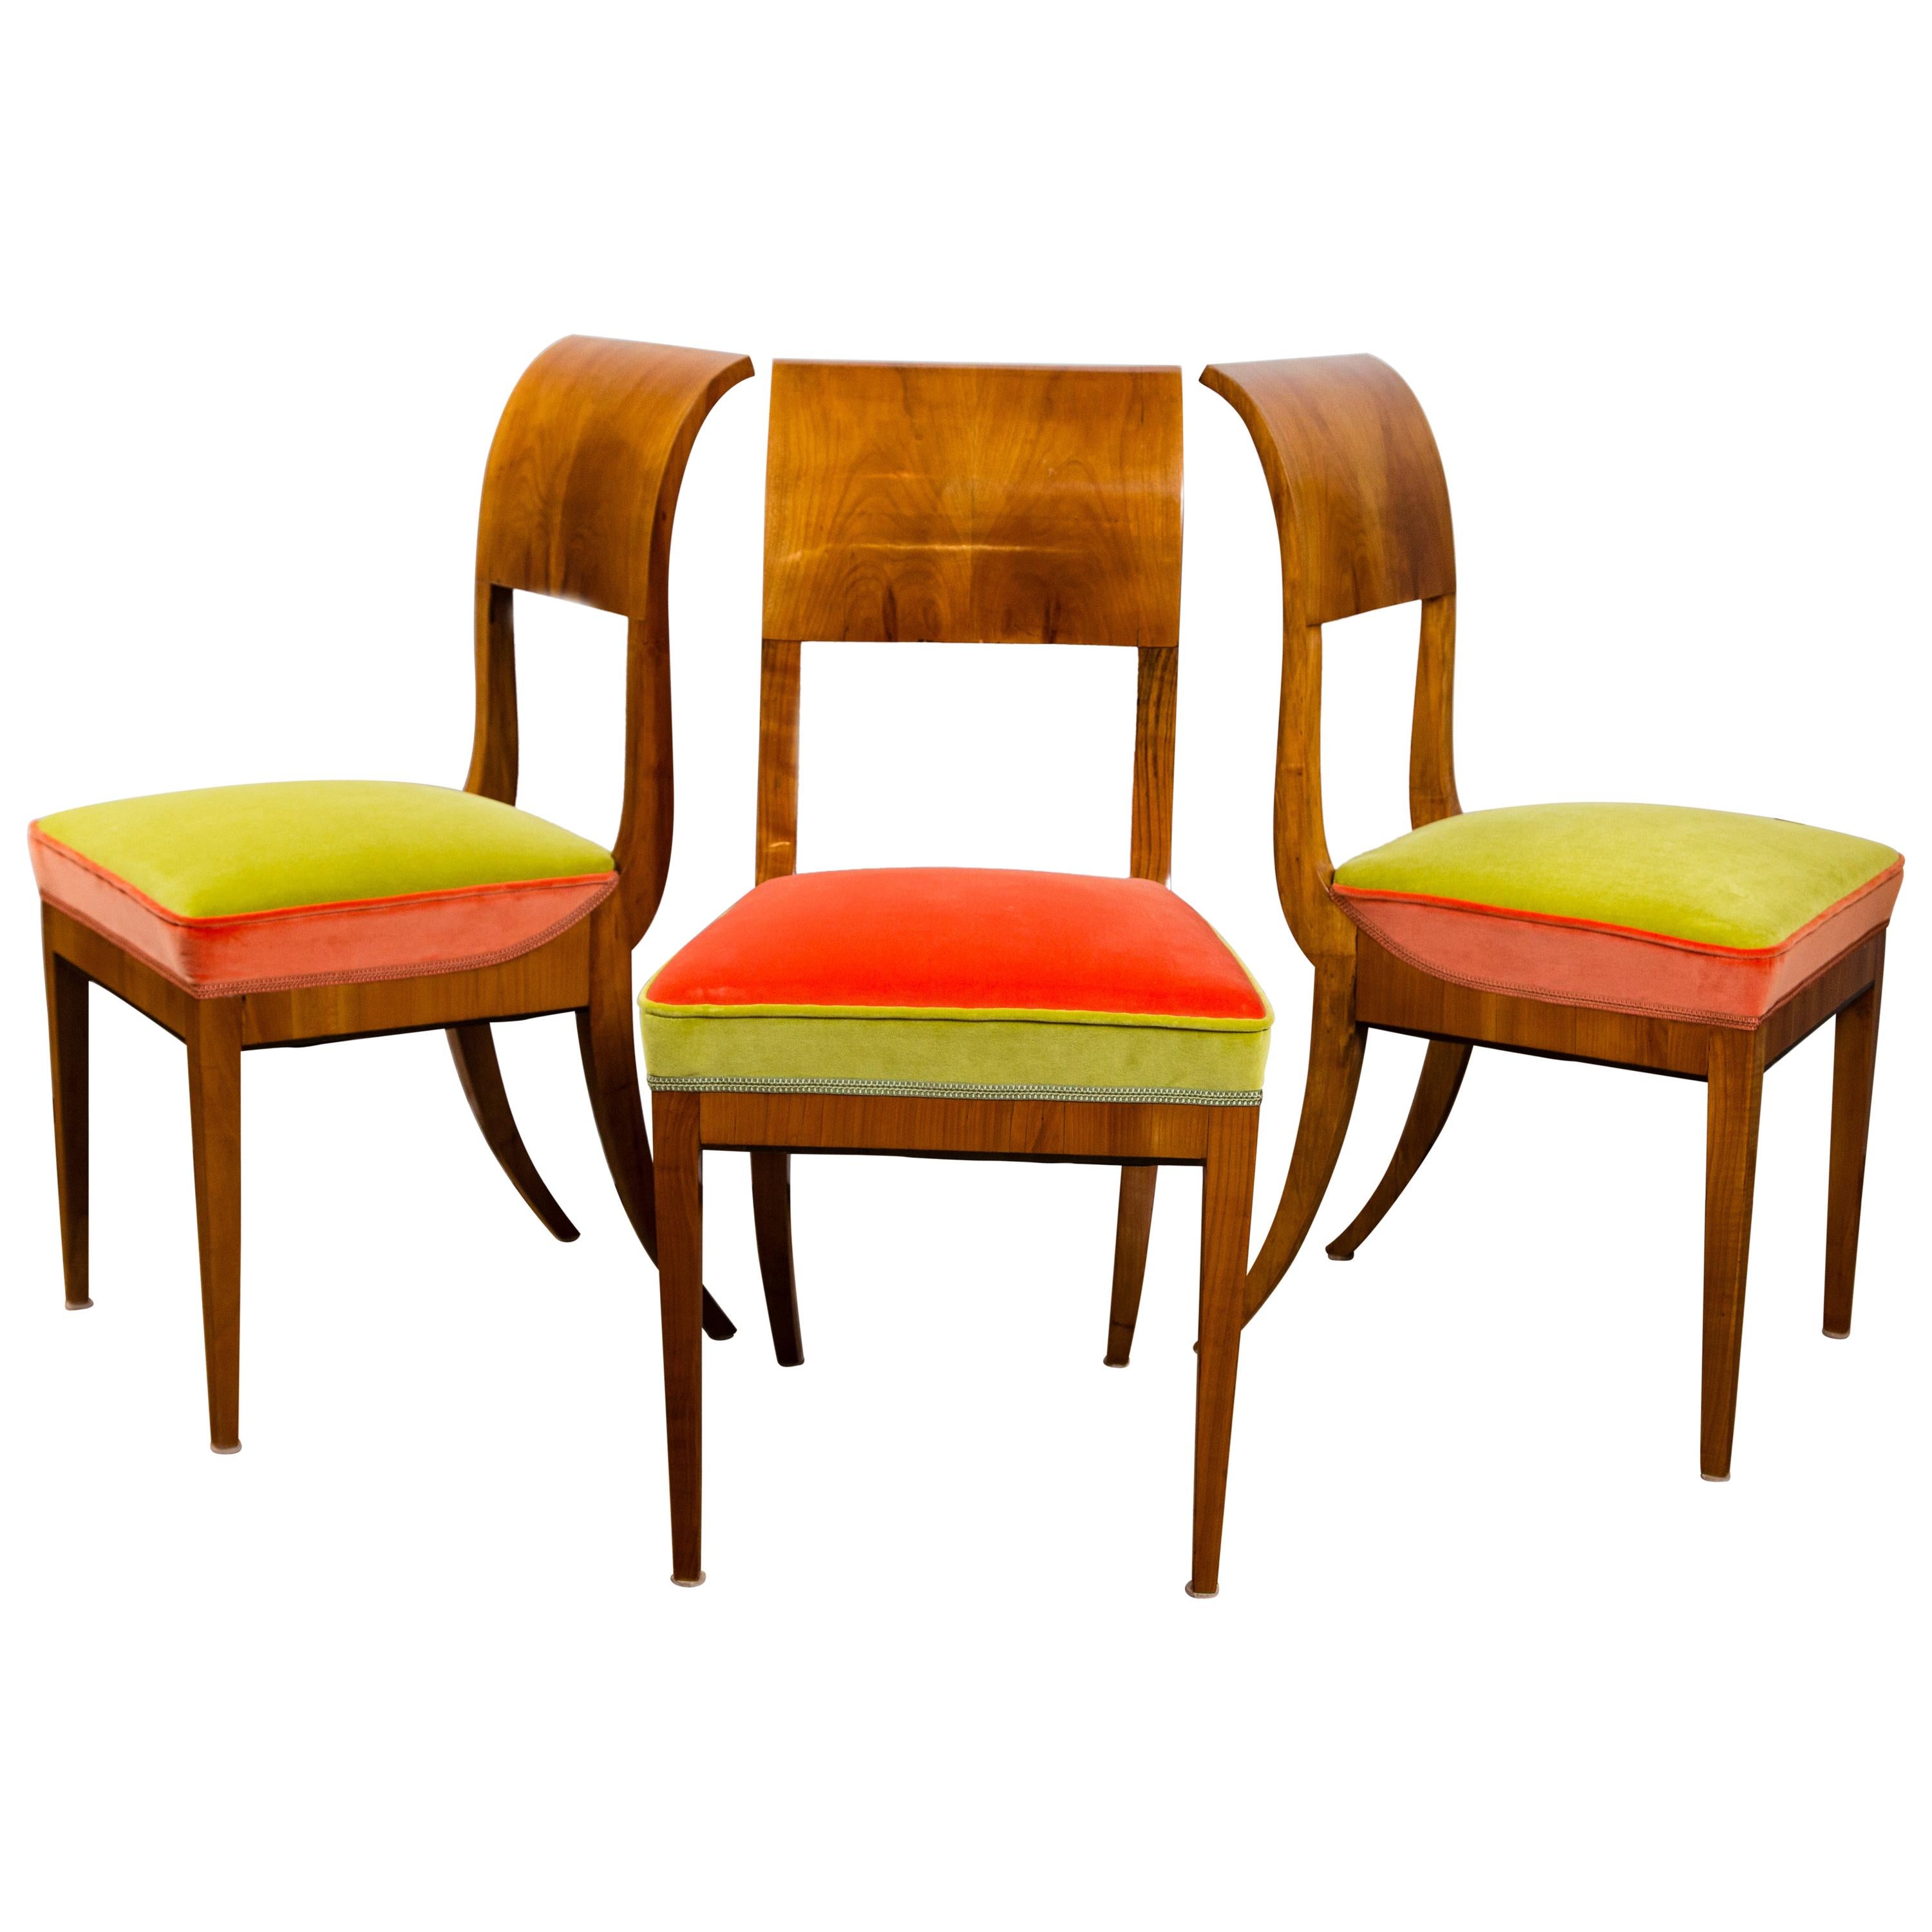 Neoclassic Biedermeier Side Chairs, 3 Available